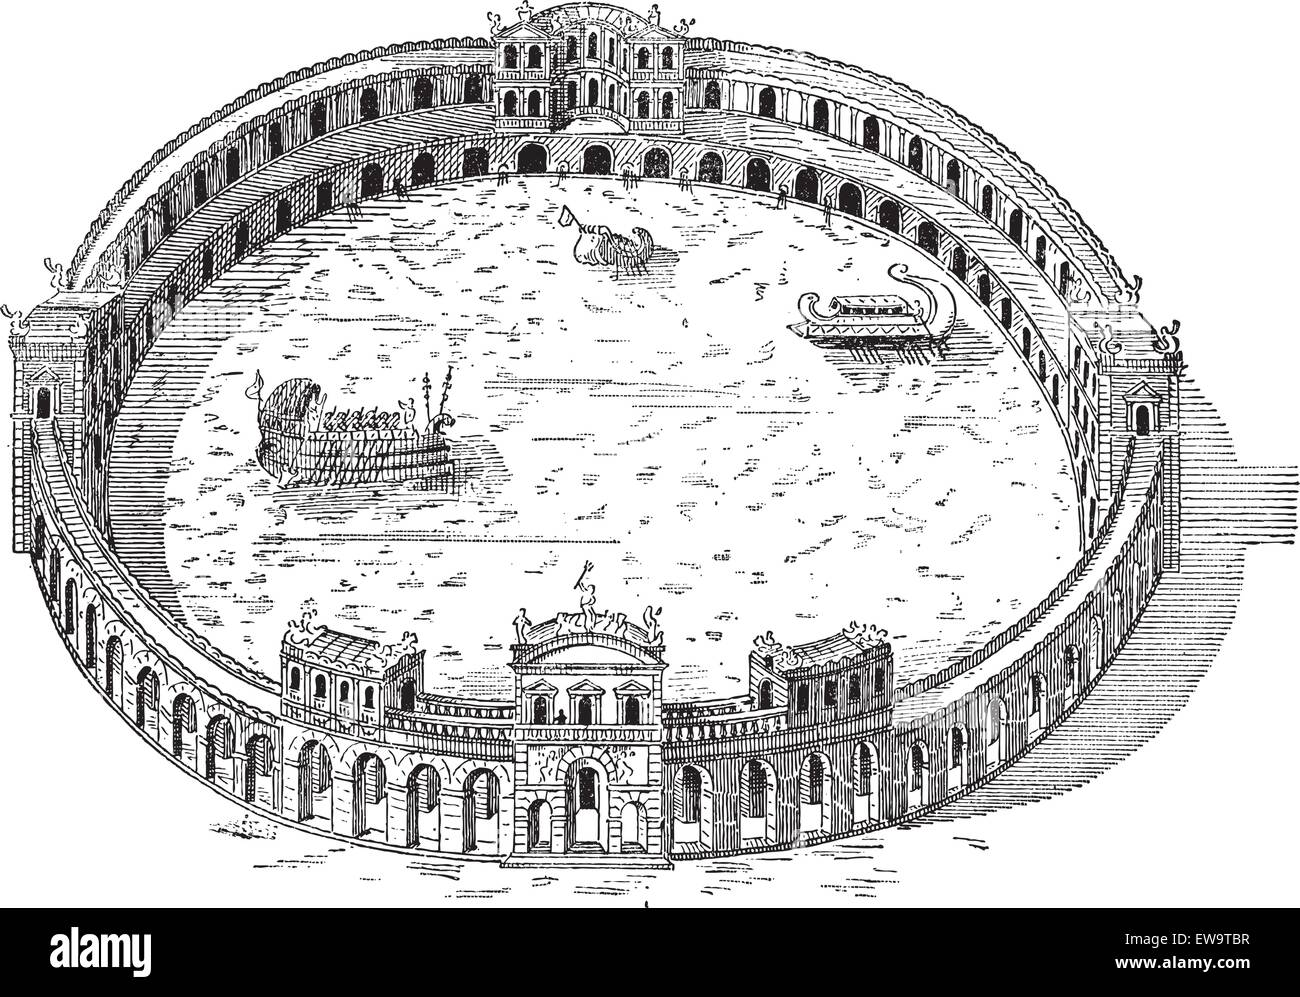 Naumachia, built by the Domitian Orders near the Tiber River, vintage engraved illustration. Dictionary of Words and Things - Larive and Fleury - 1895 Stock Vector